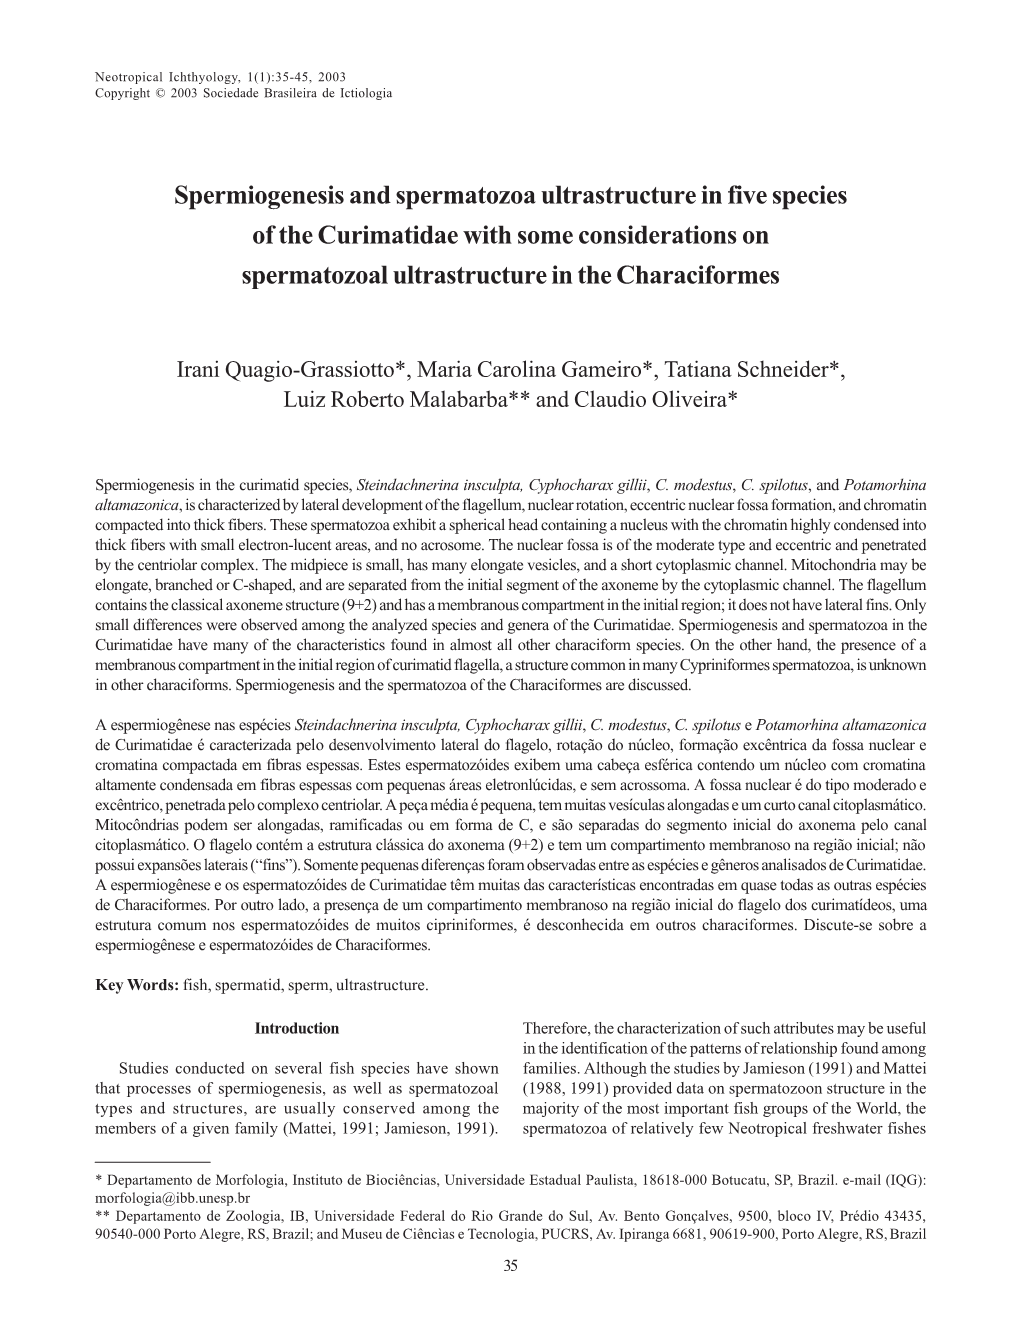 Spermiogenesis and Spermatozoa Ultrastructure in Five Species of the Curimatidae with Some Considerations on Spermatozoal Ultrastructure in the Characiformes